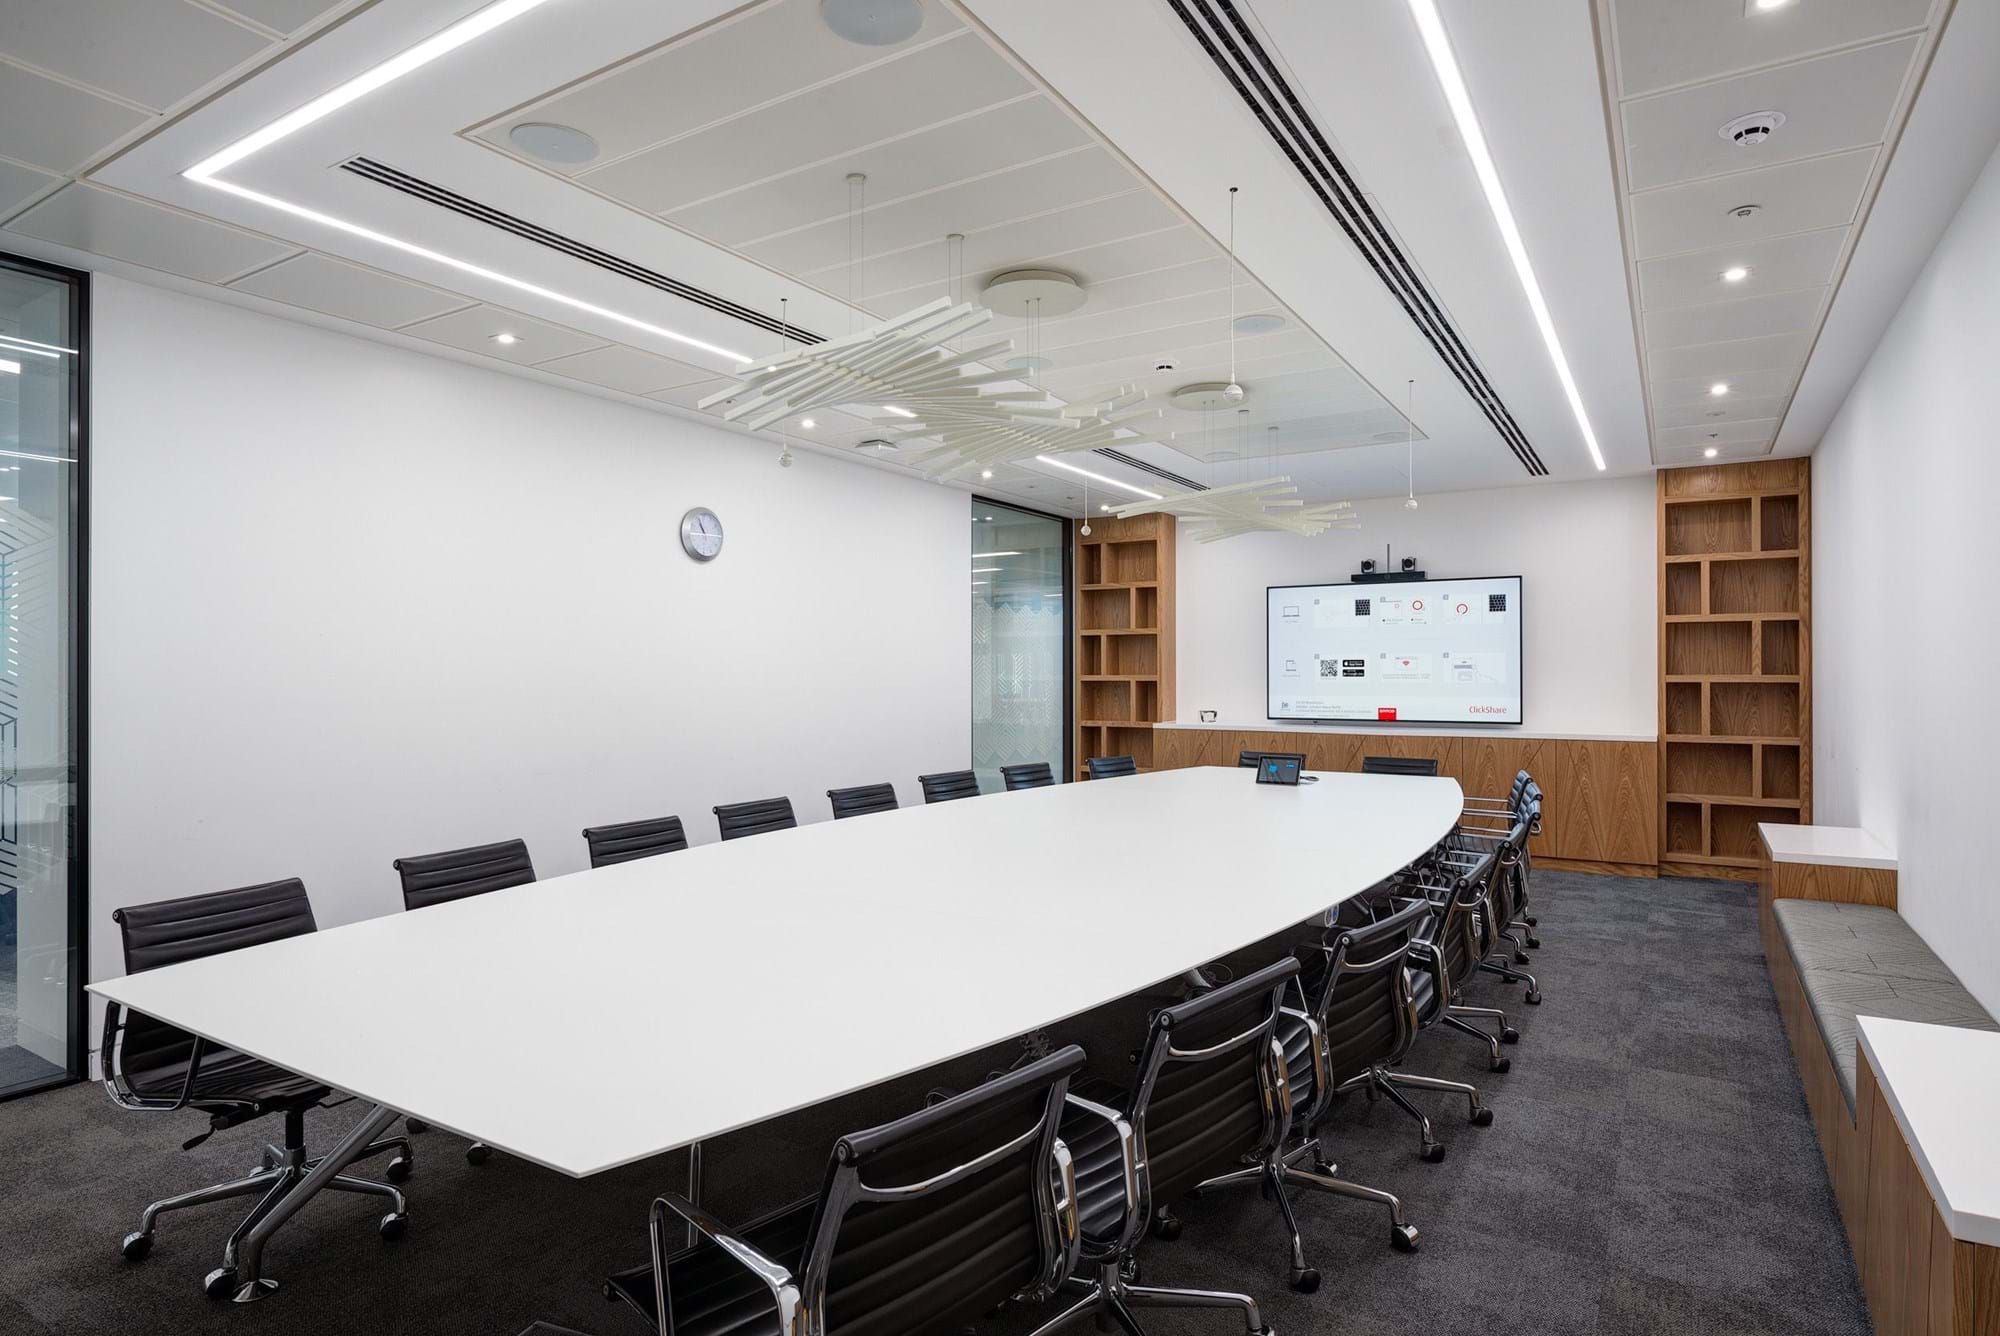 Modus Workspace office design, fit out and refurbishment - Atkins - Victoria, London - Atkins 10 highres sRGB.jpg